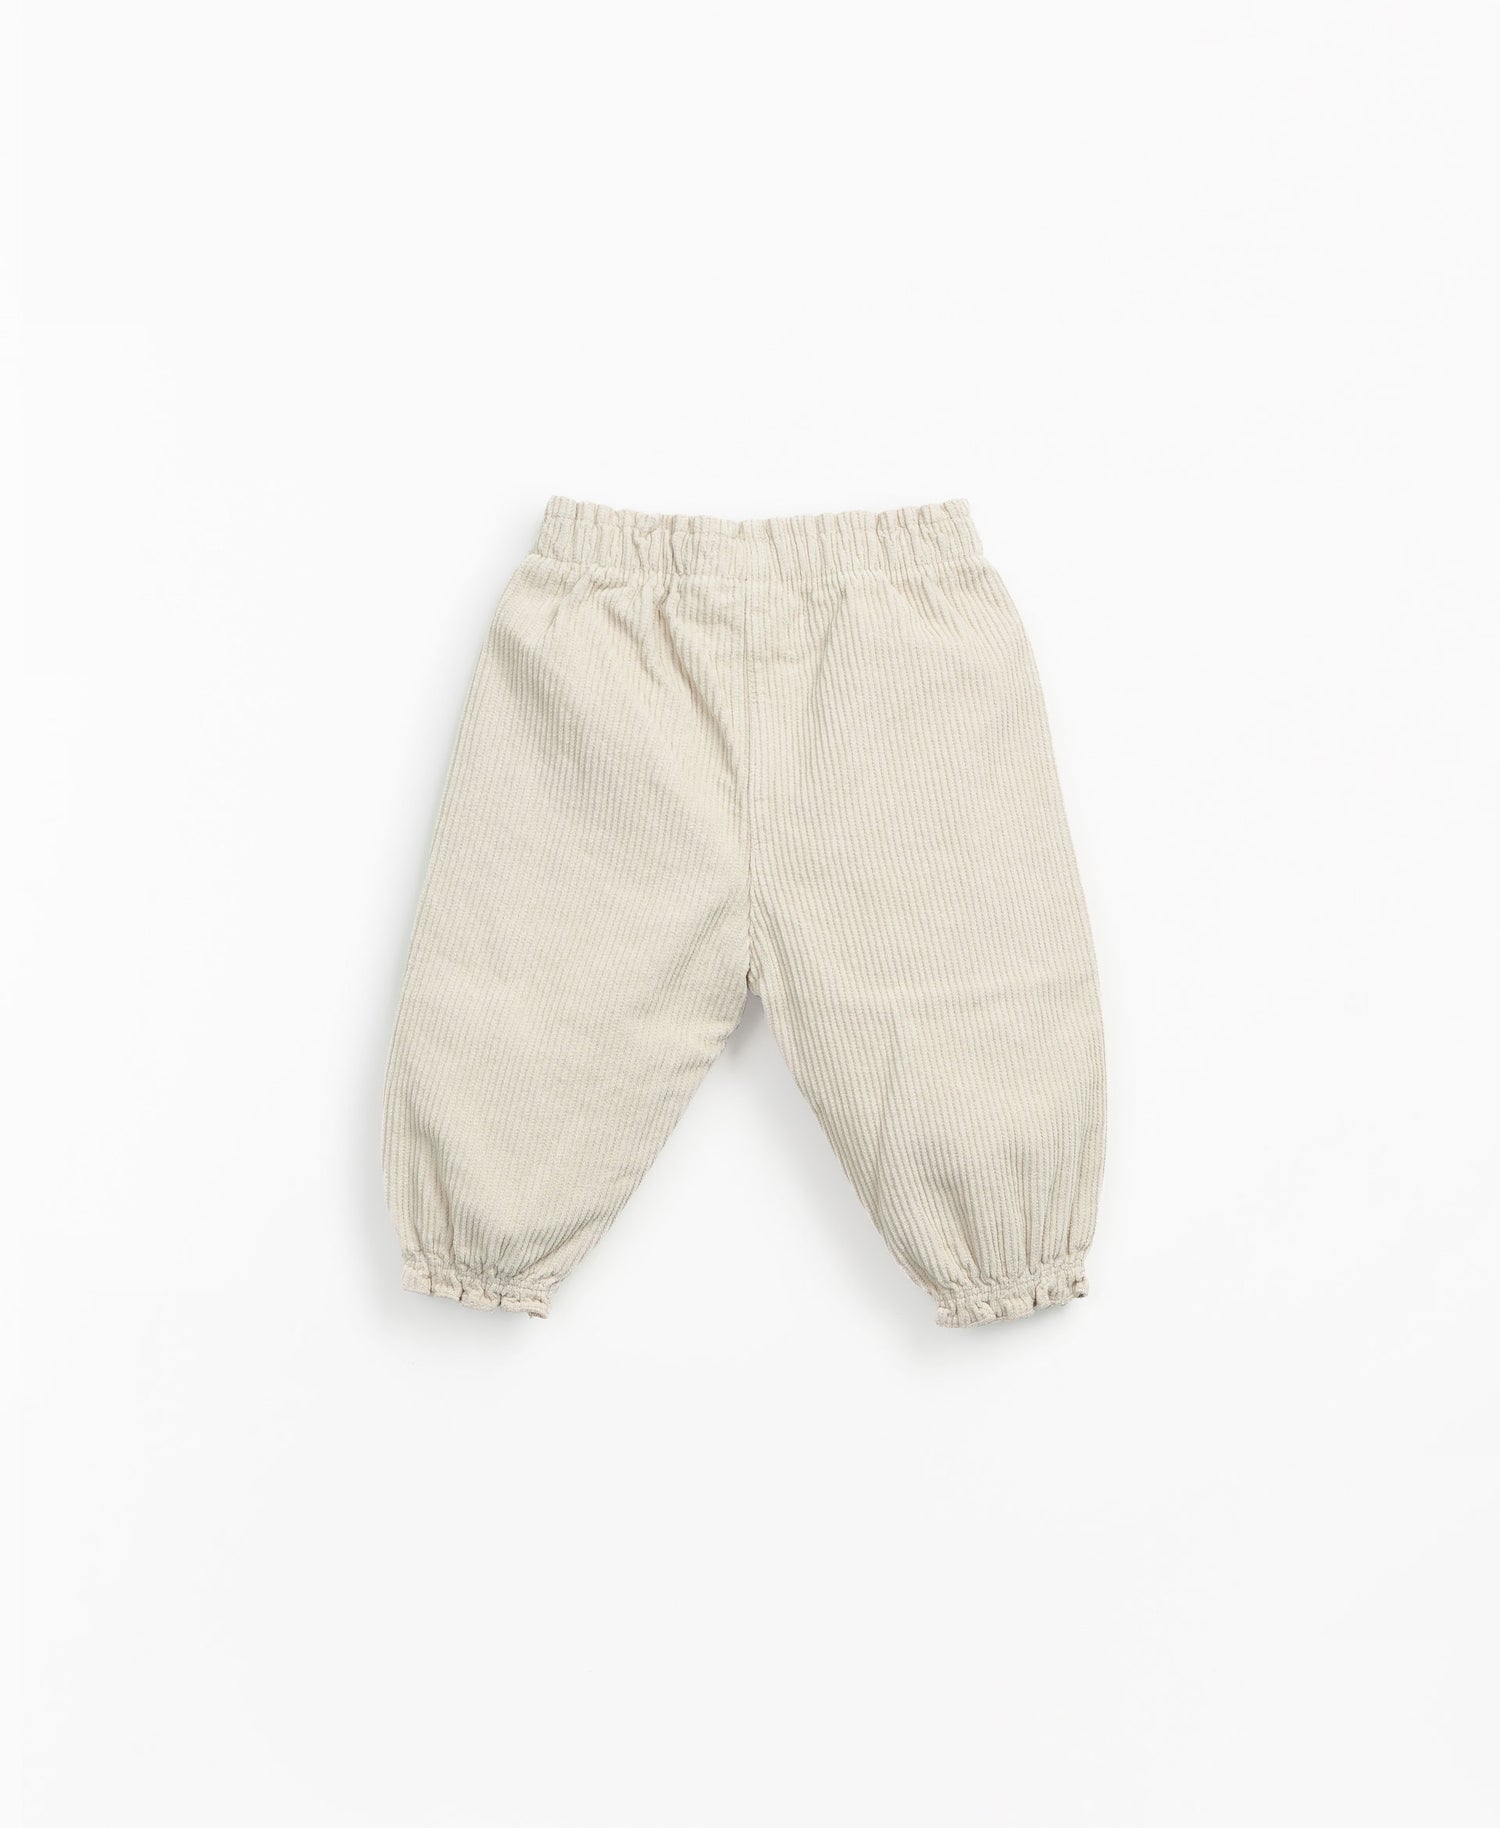 Play up -  Baby Cordhose natur